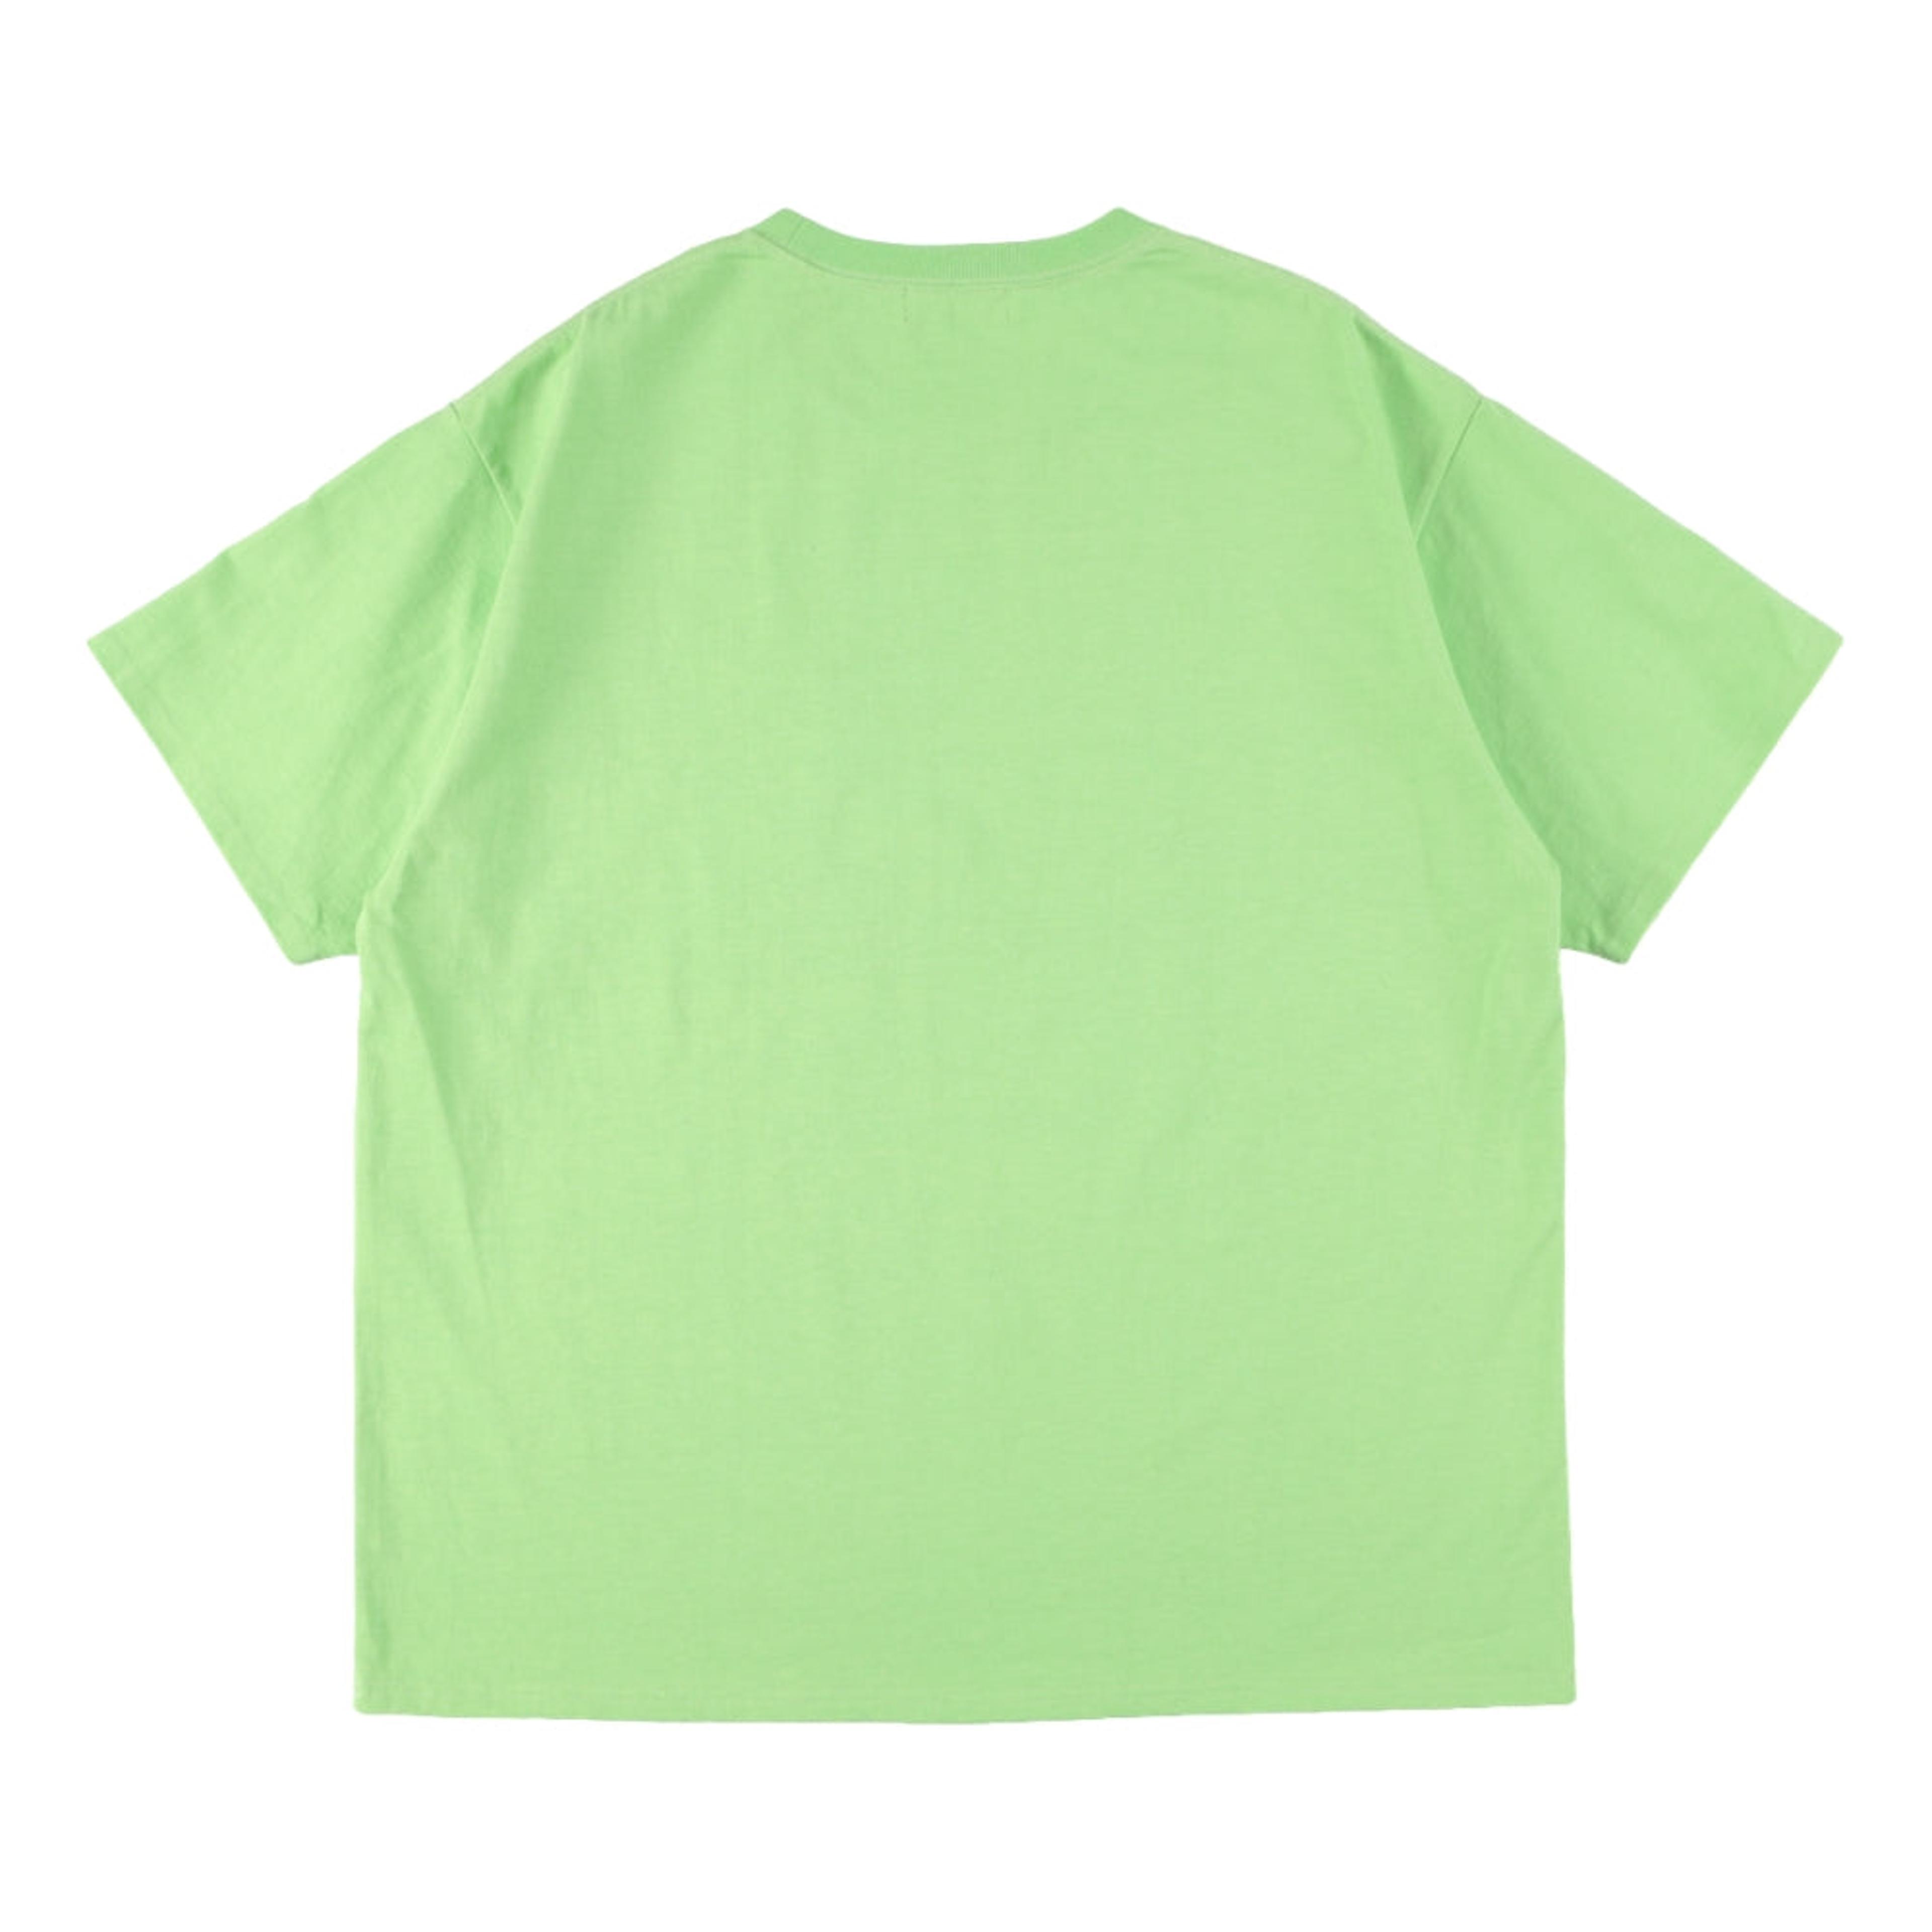 NTWRK - WIND AND SEA SDT COLOR POCKET S/S TEE-GREEN